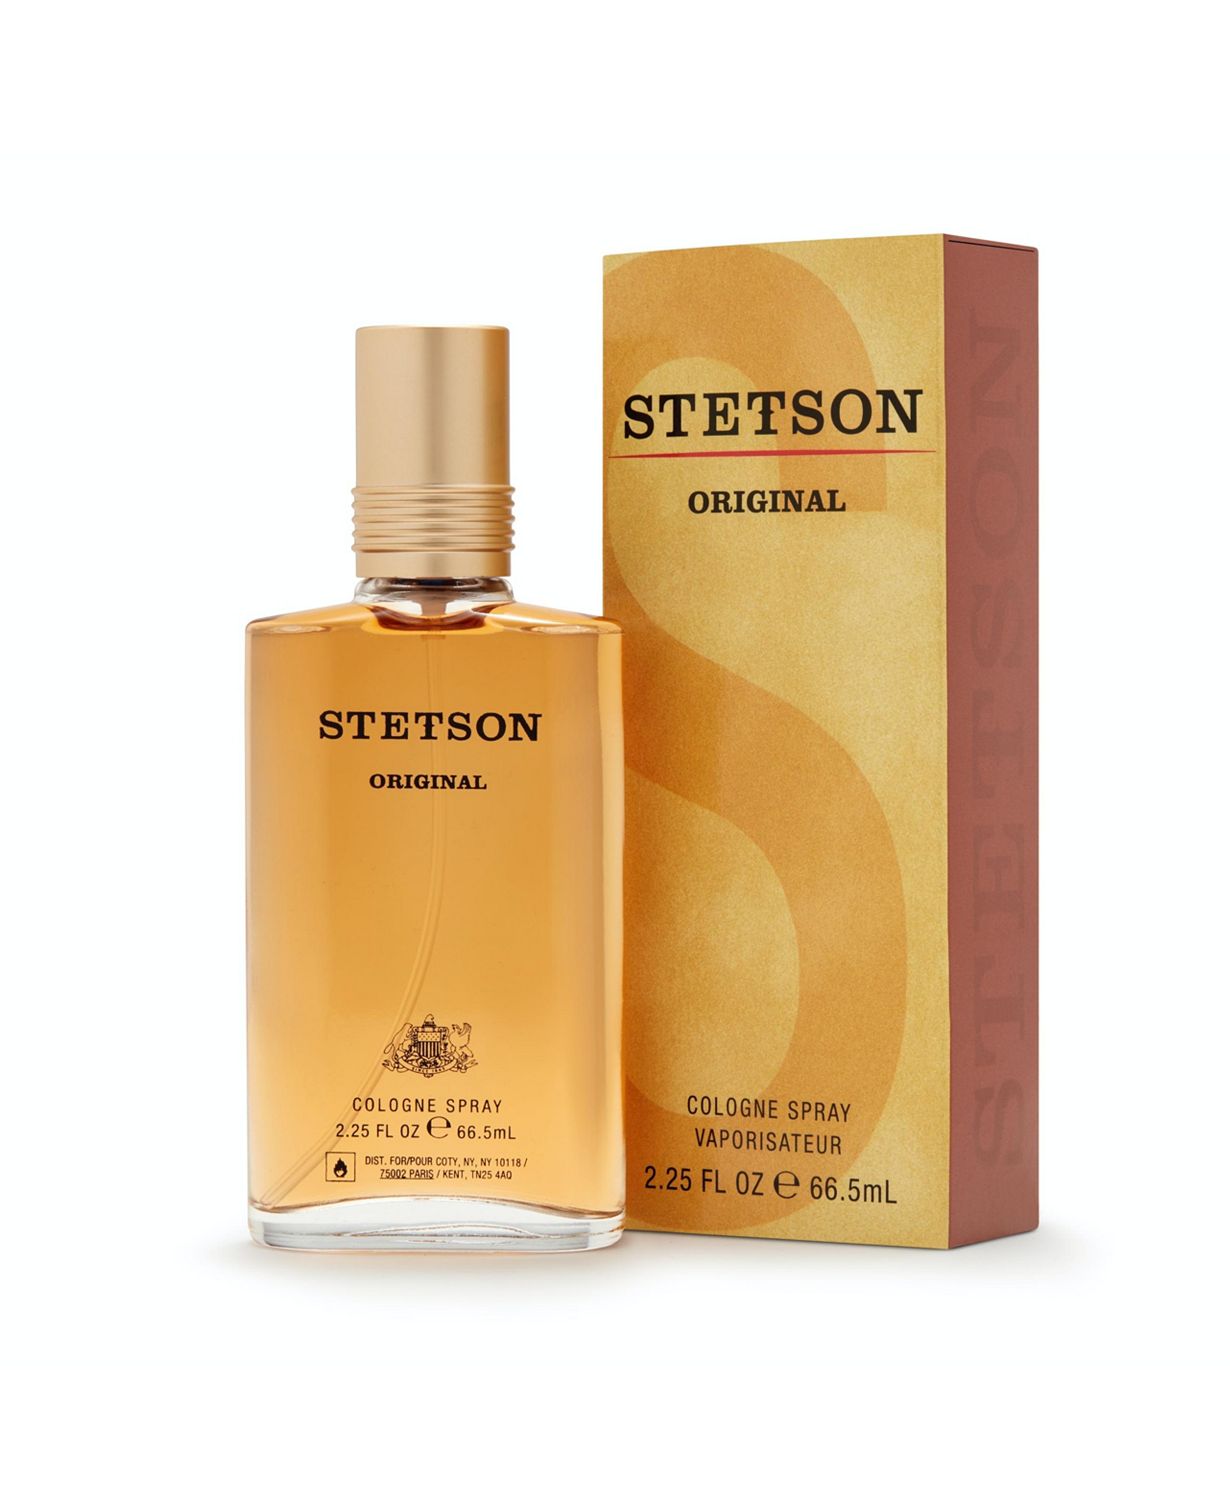 Stetson Original by Cologne for Men - Classic, Woody and Masculine Aroma with Fragrance Notes of Citrus, Patchouli, and Tonka Bean - 2.25 Fl Oz